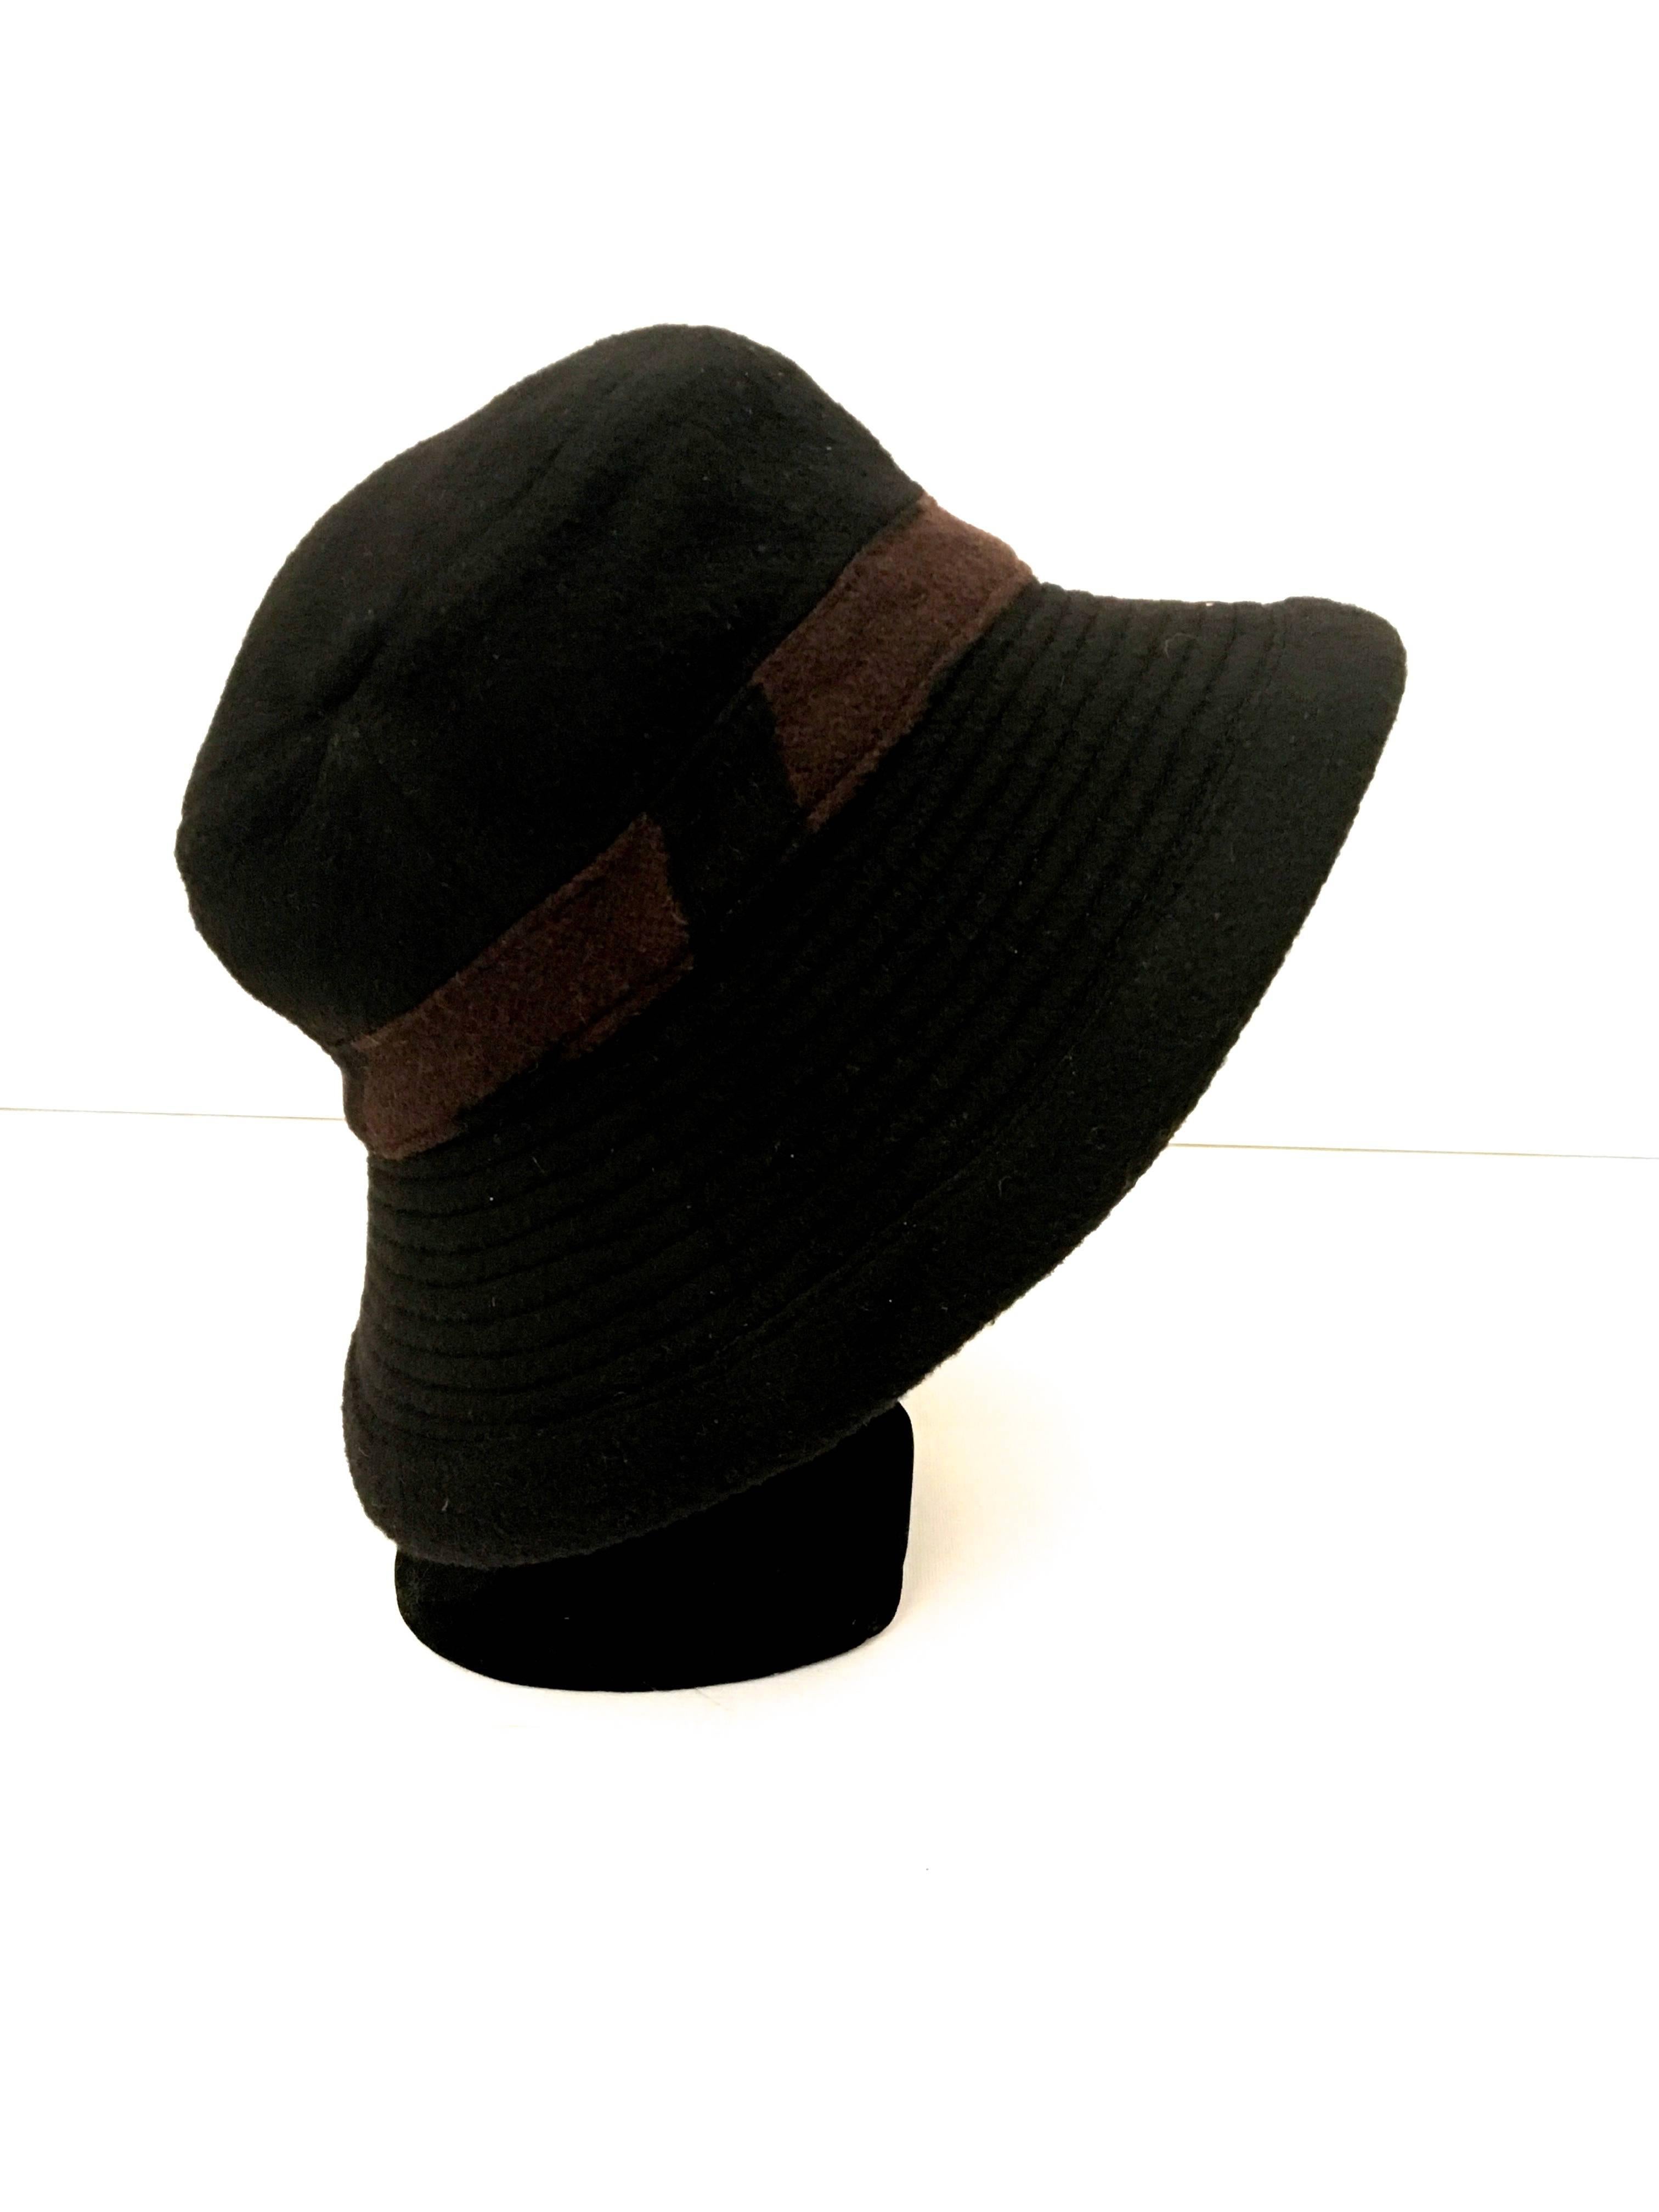 Presented here is a beautiful hat from Hermes Paris. This beautiful black hat is made from 100% camel’s hair. There is a brown and black patterned band around the crown of the hat. The hat can be worn down or with the brim up. When worn down, the